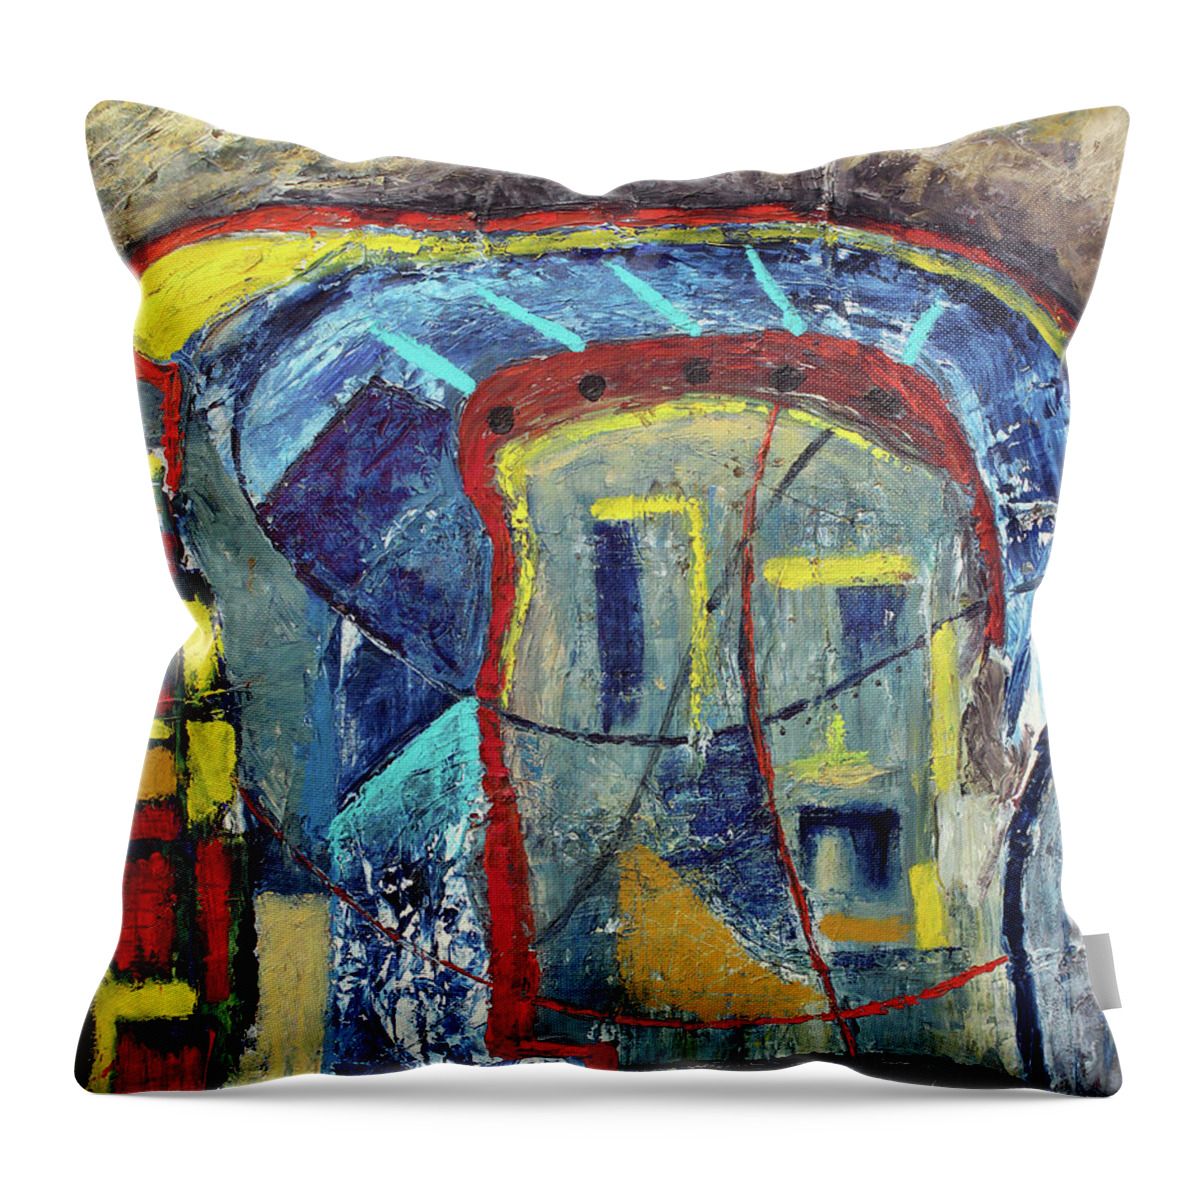 African Art Throw Pillow featuring the painting Liberty And Freedom by Michael Nene